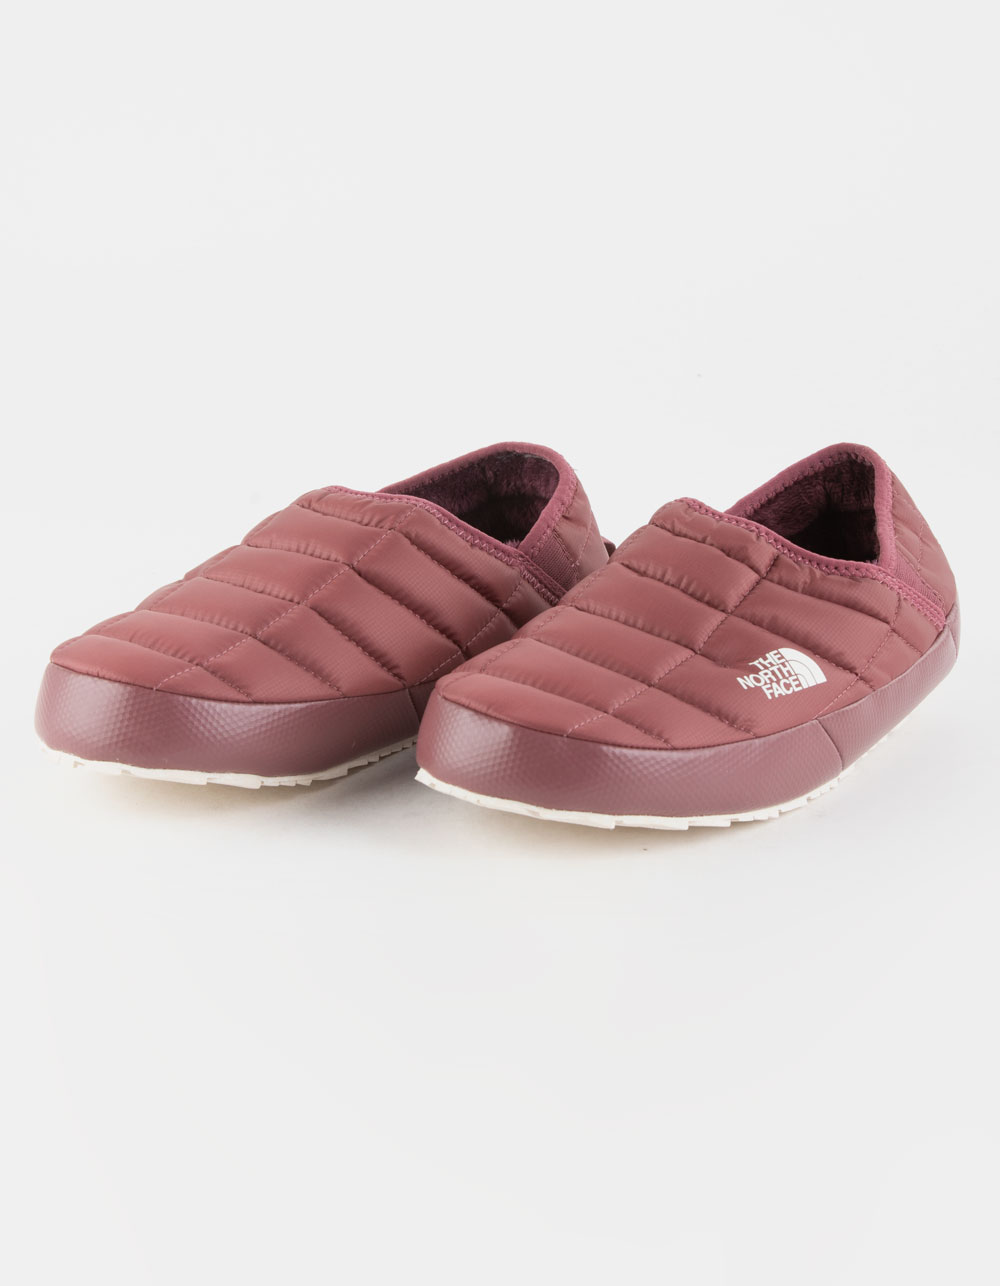 THE NORTH FACE Thermoball Traction Womens Slippers - DUSTY PINK | Tillys